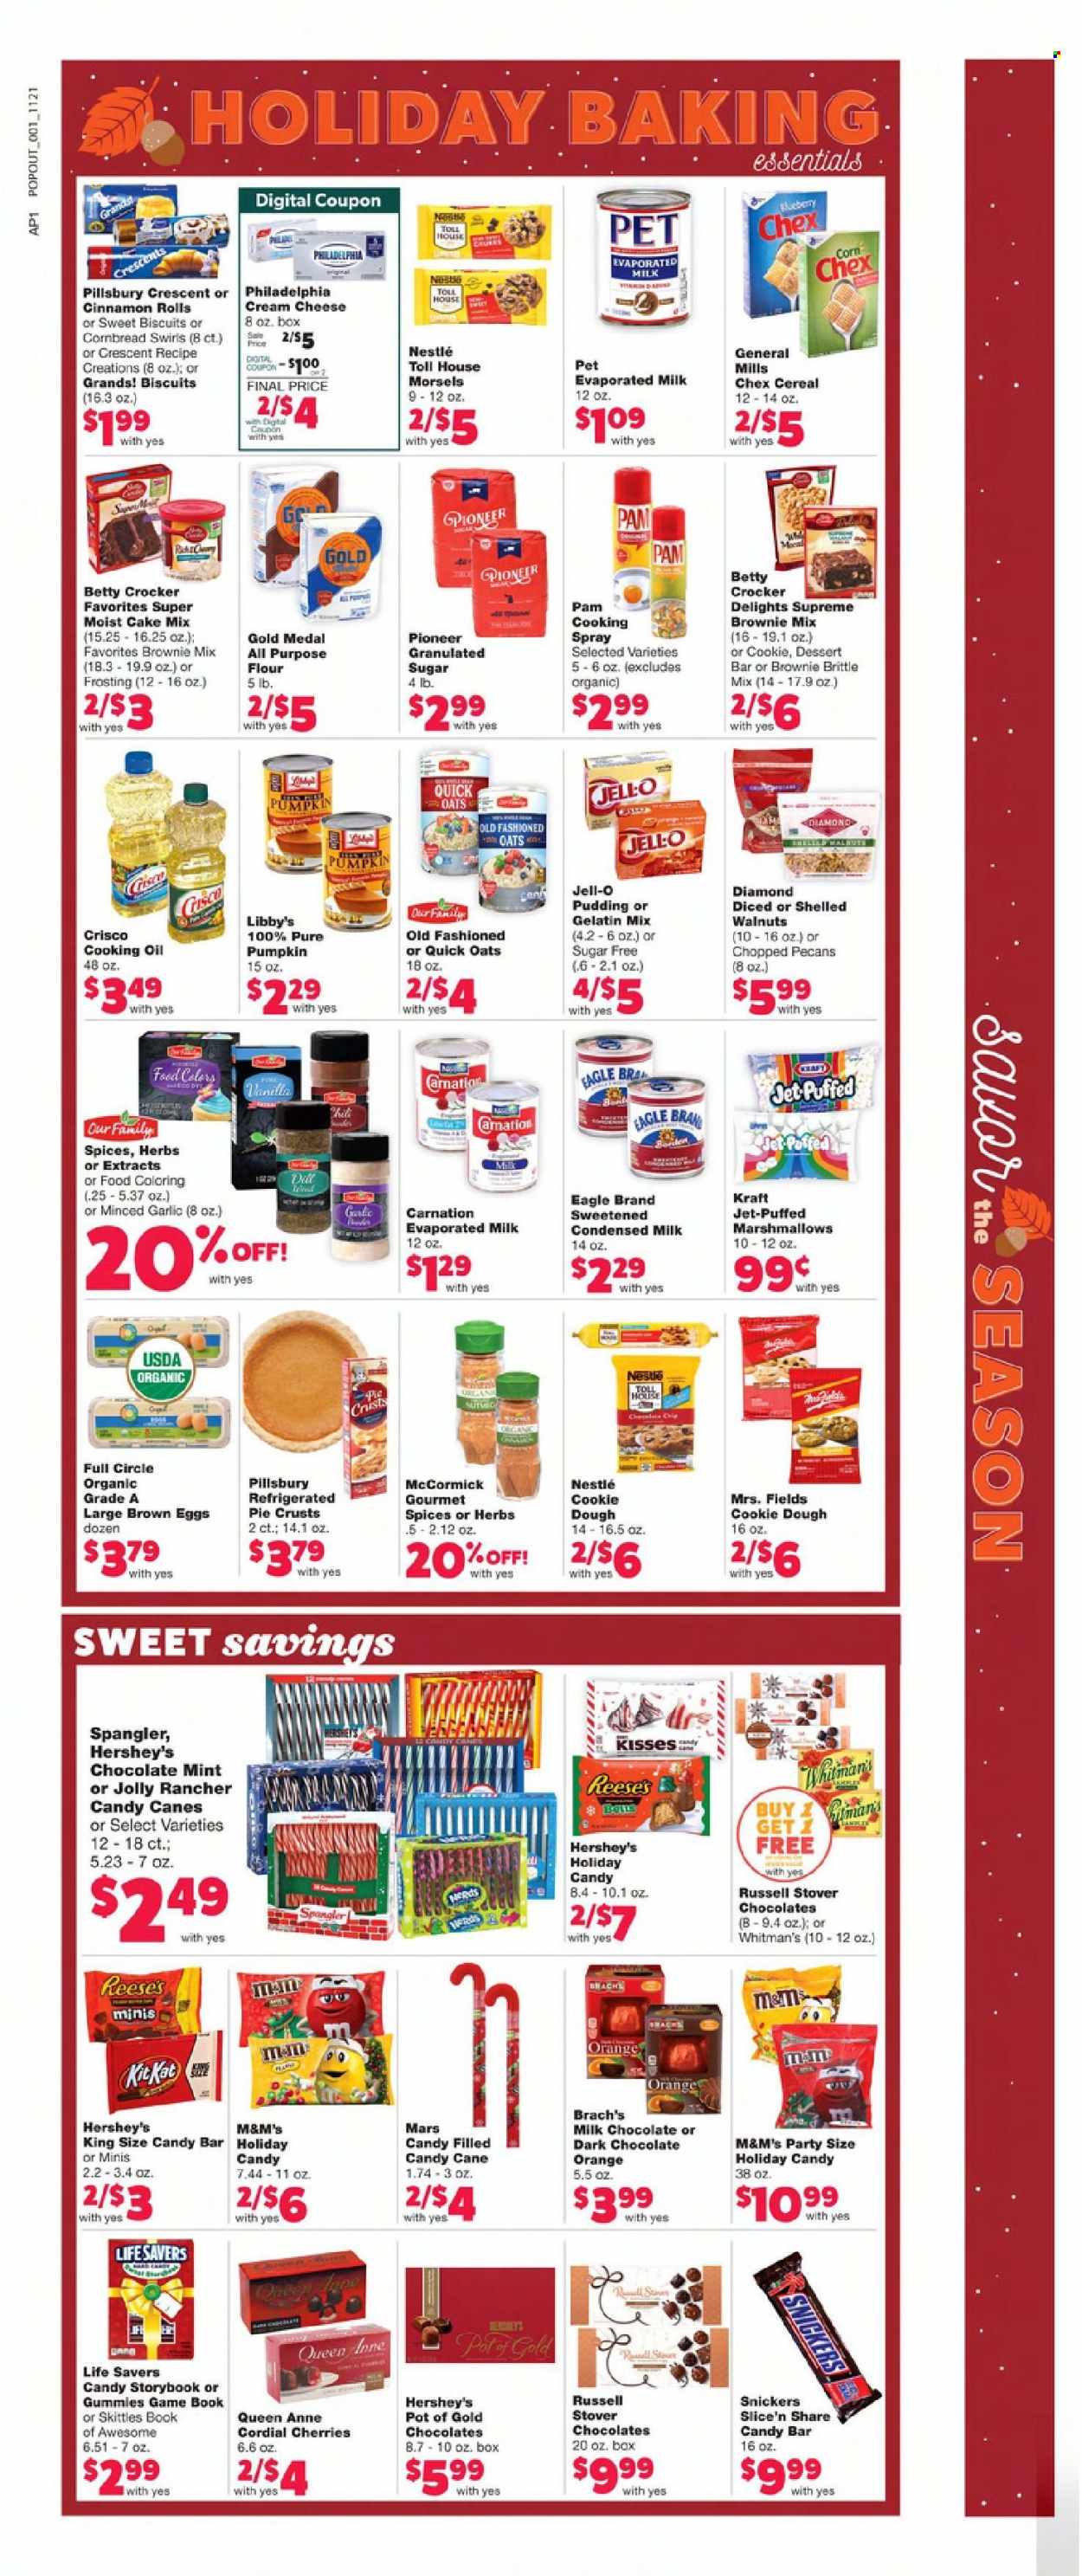 thumbnail - Family Dollar Flyer - 11/21/2021 - 11/27/2021 - Sales products - corn bread, cinnamon roll, brownie mix, cake mix, corn, cherries, Pillsbury, Kraft®, cream cheese, Philadelphia, cheese, pudding, evaporated milk, condensed milk, eggs, Reese's, Hershey's, cookie dough, marshmallows, milk chocolate, Nestlé, chocolate, candy cane, Snickers, Mars, M&M's, biscuit, Skittles, all purpose flour, Crisco, flour, frosting, pie crust, oats, Jell-O, cereals, Quick Oats, dill, herbs, cooking spray, oil, walnuts, pecans, Jet, pot, book, Pioneer, digital pet. Page 7.